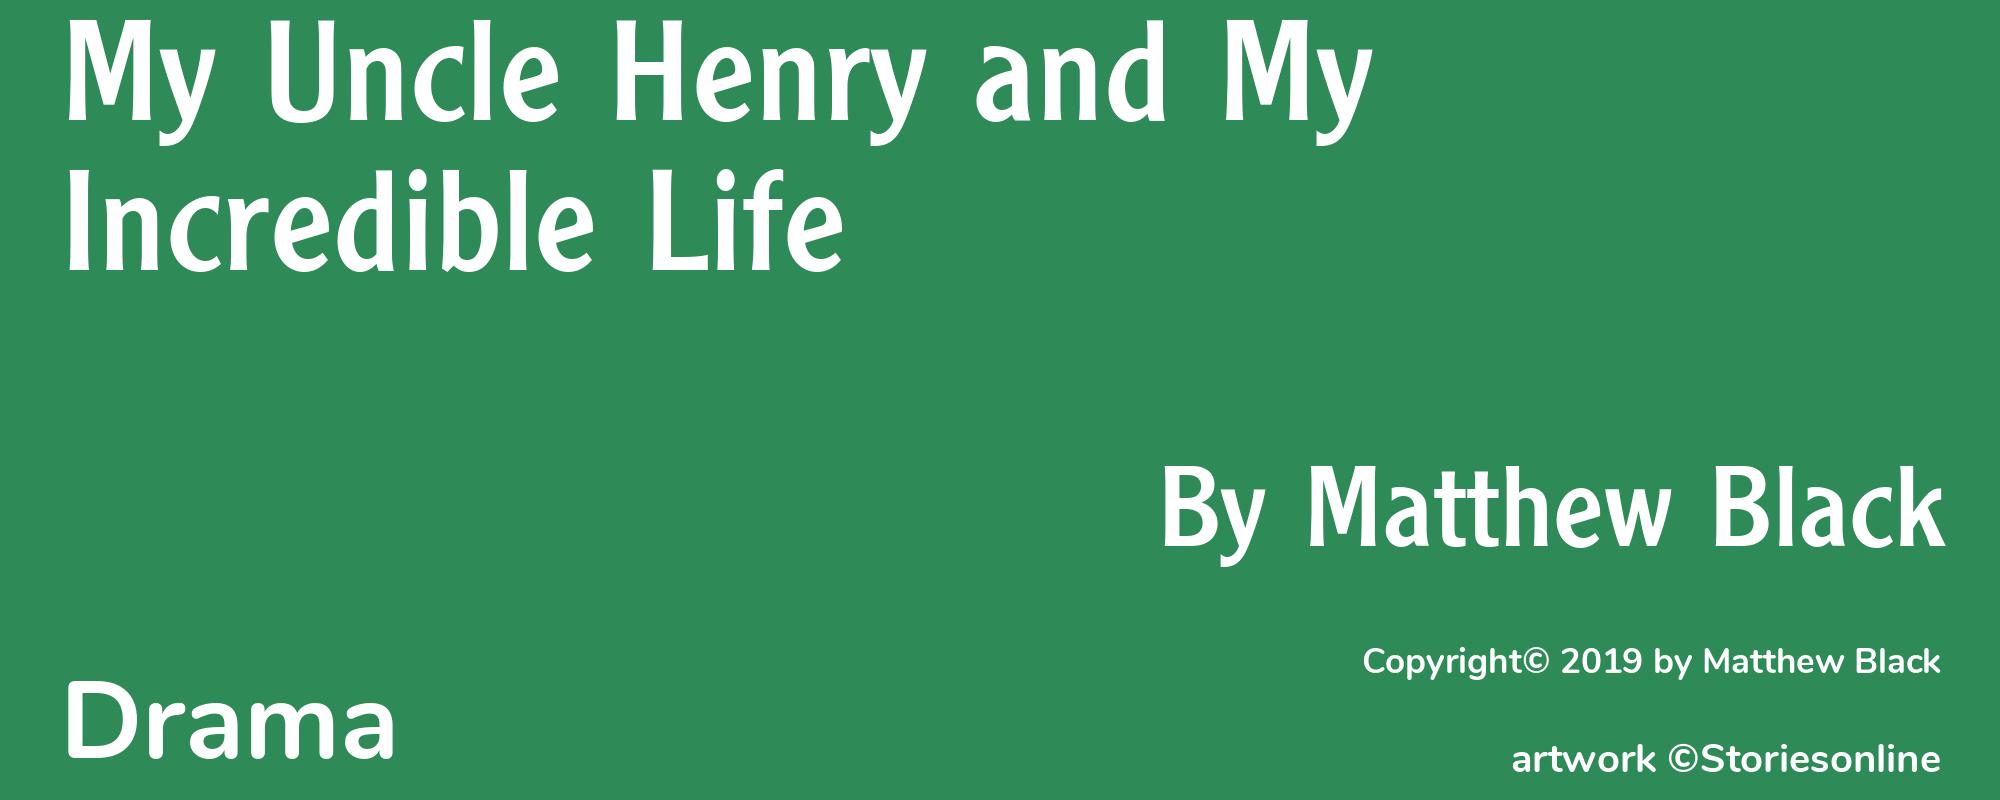 My Uncle Henry and My Incredible Life - Cover